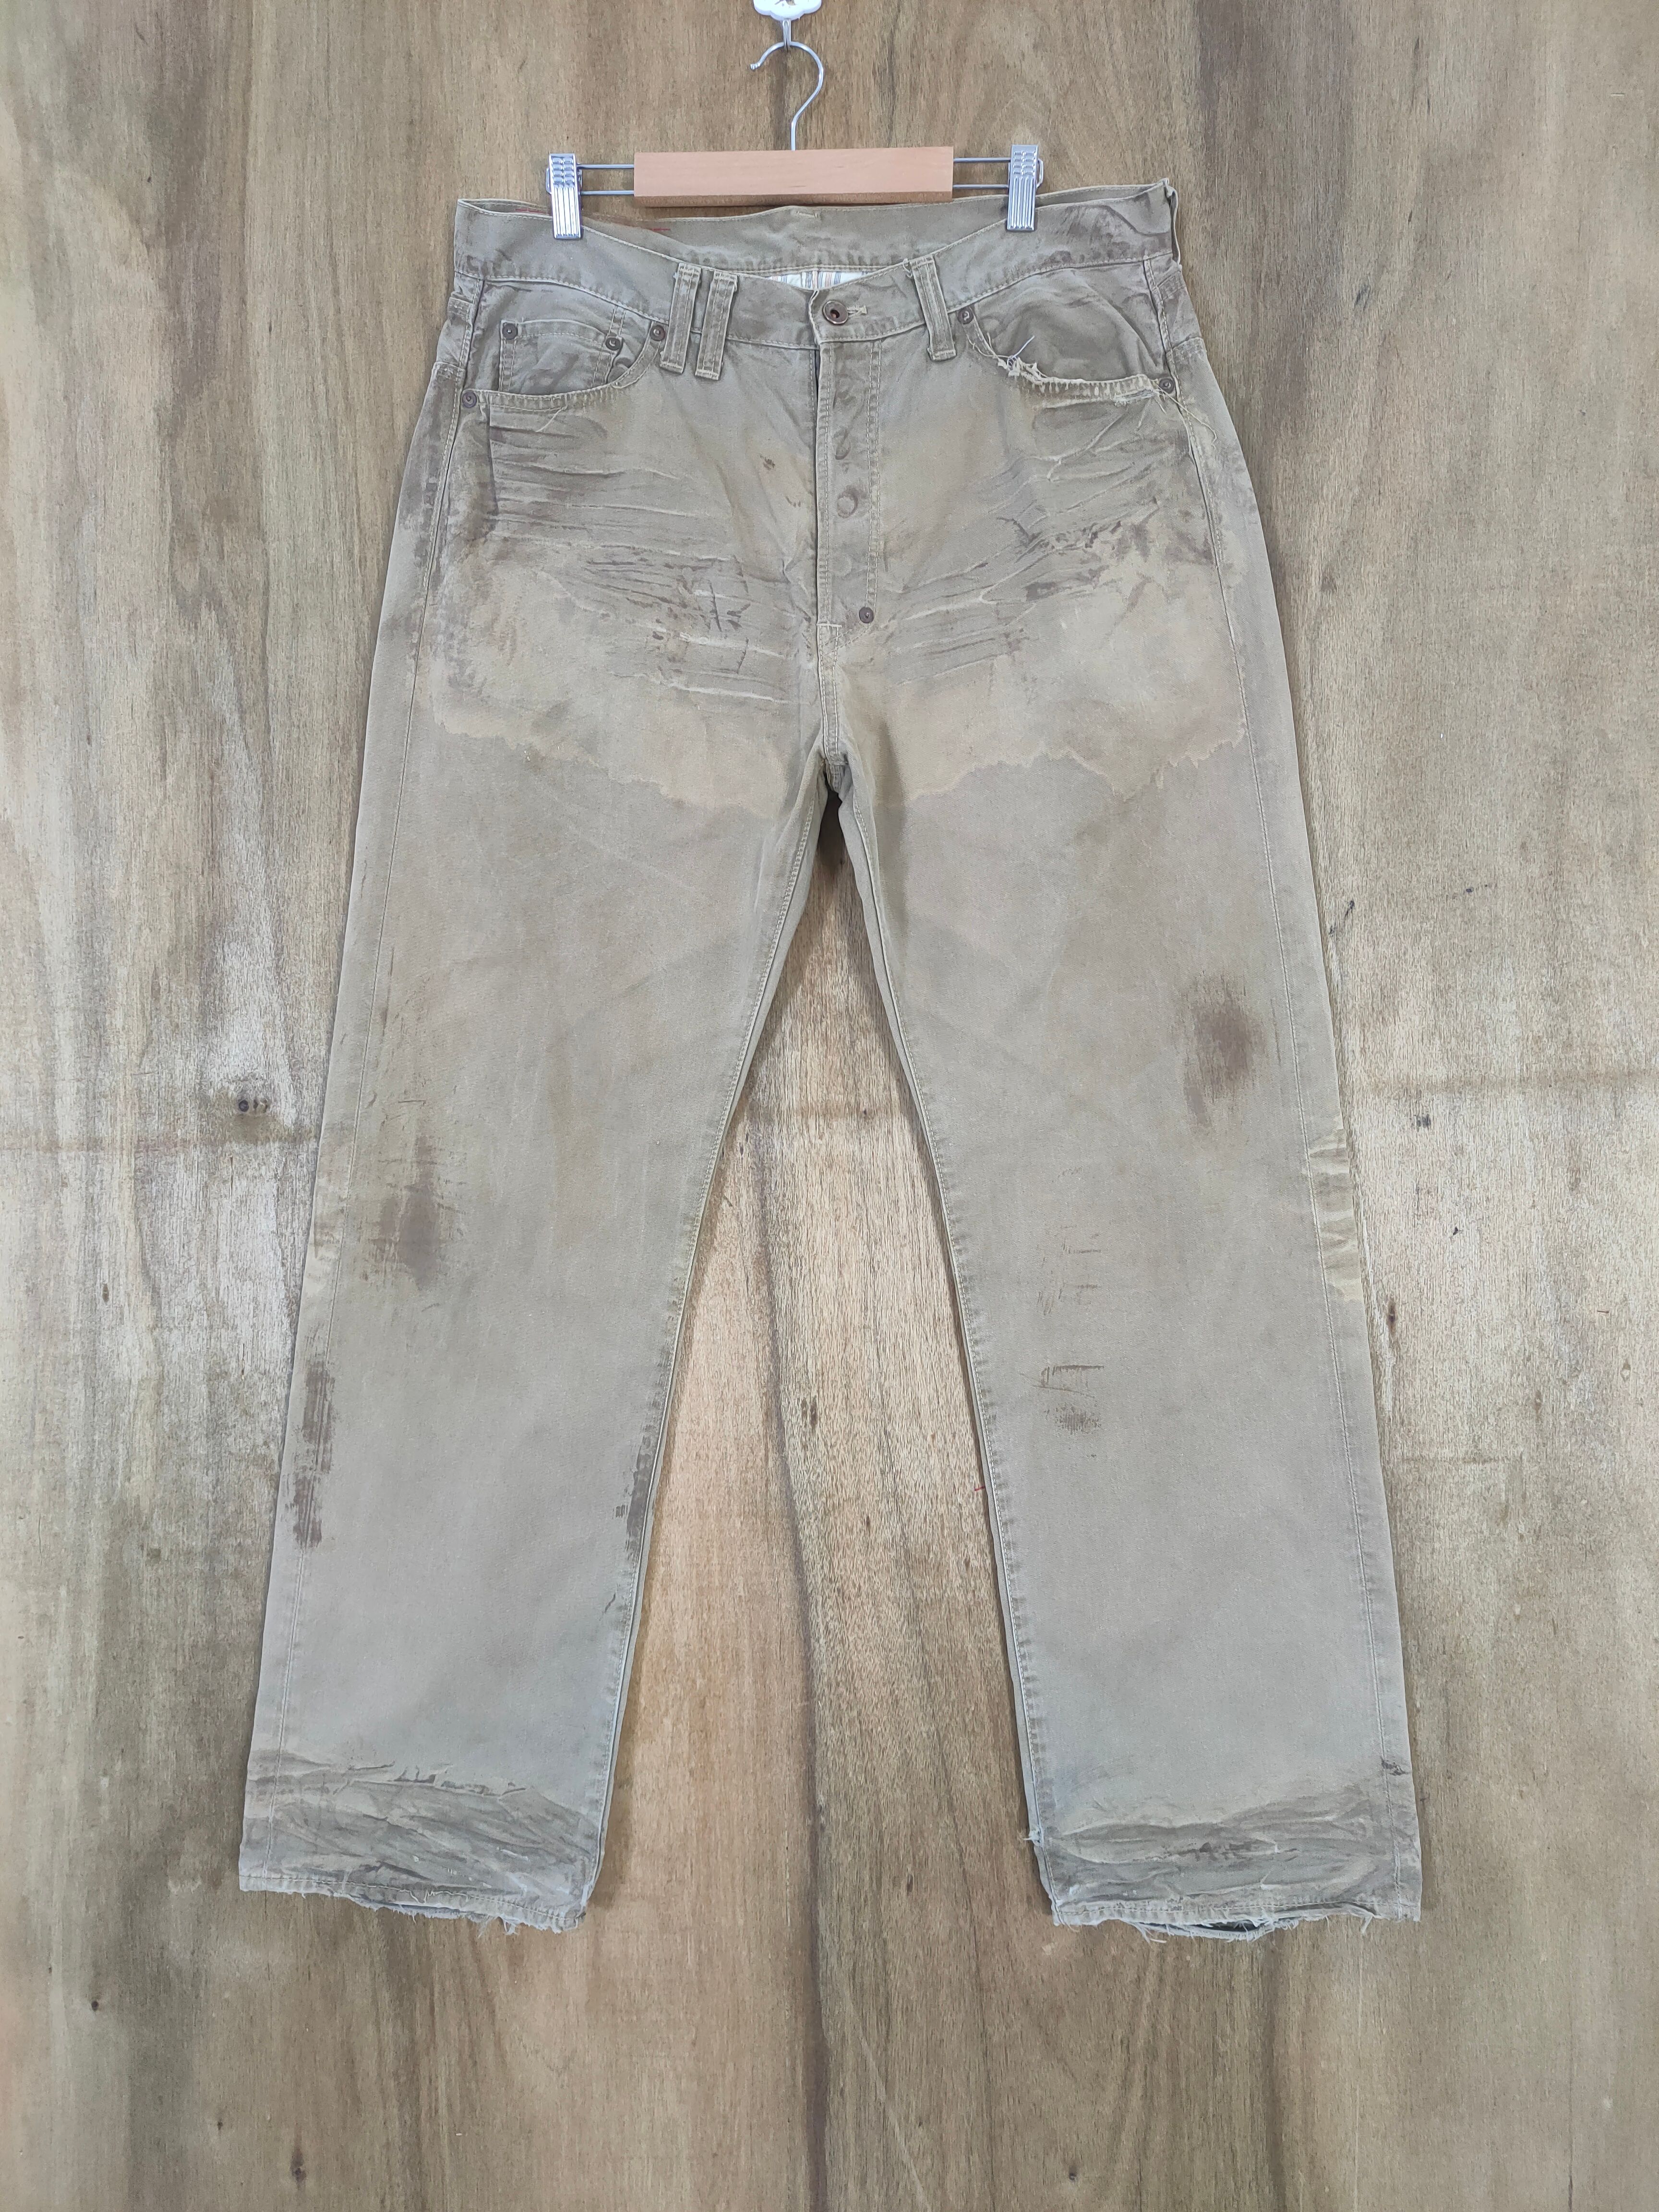 Vintage ANACHRONORM FADED STAIN TROUSERS PANTS | Grailed